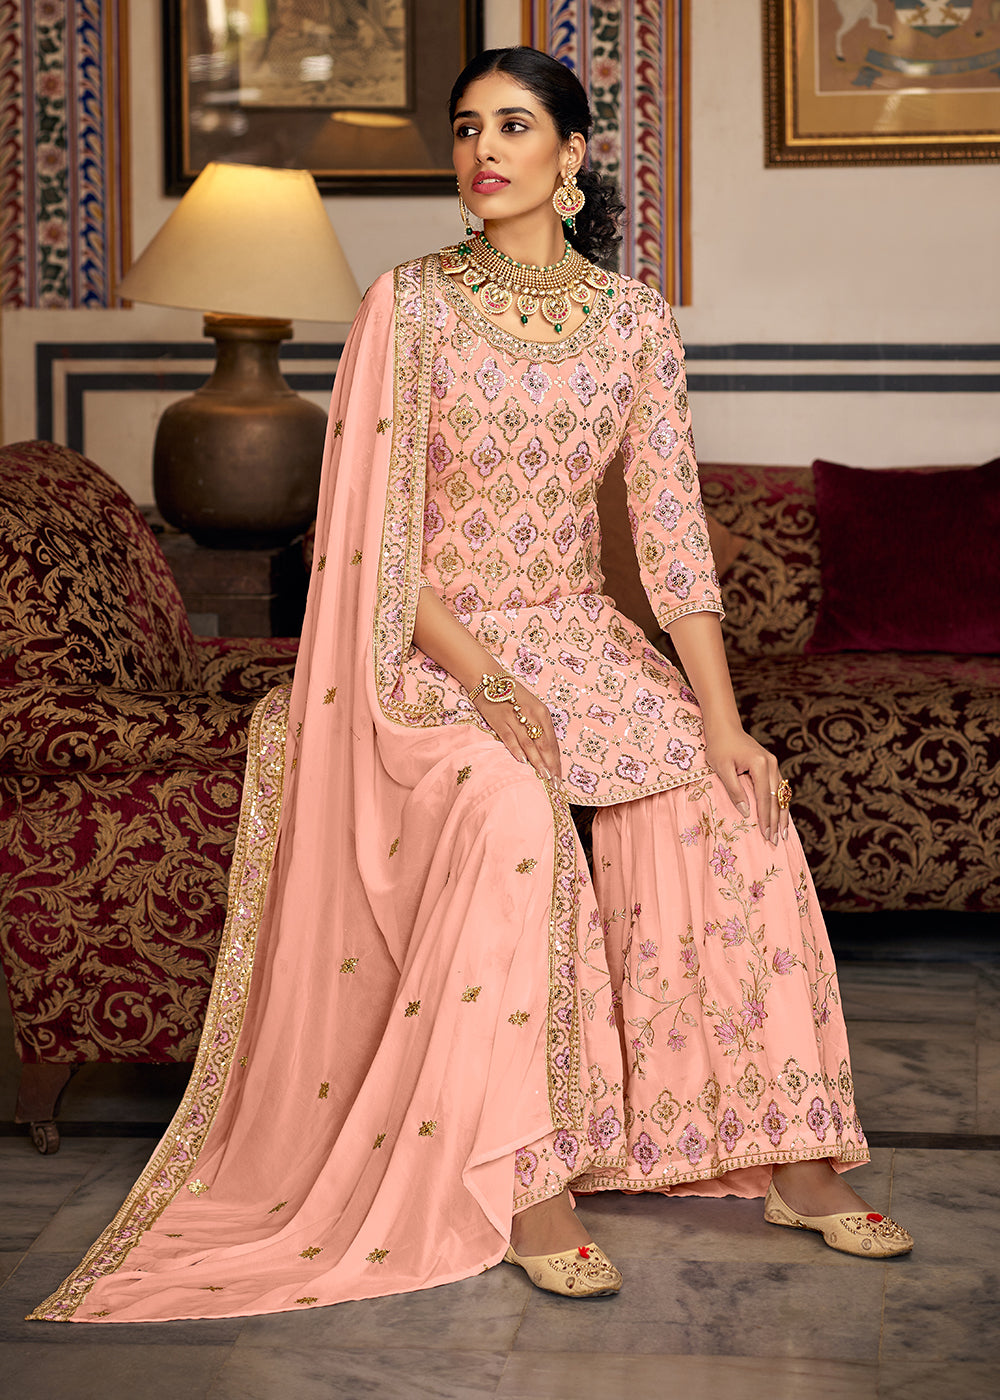 Shop Now Heavy Georgette Peach Sequins Embroidered Gharara Suit Online at Empress Clothing in USA, UK, Canada, Italy & Worldwide.